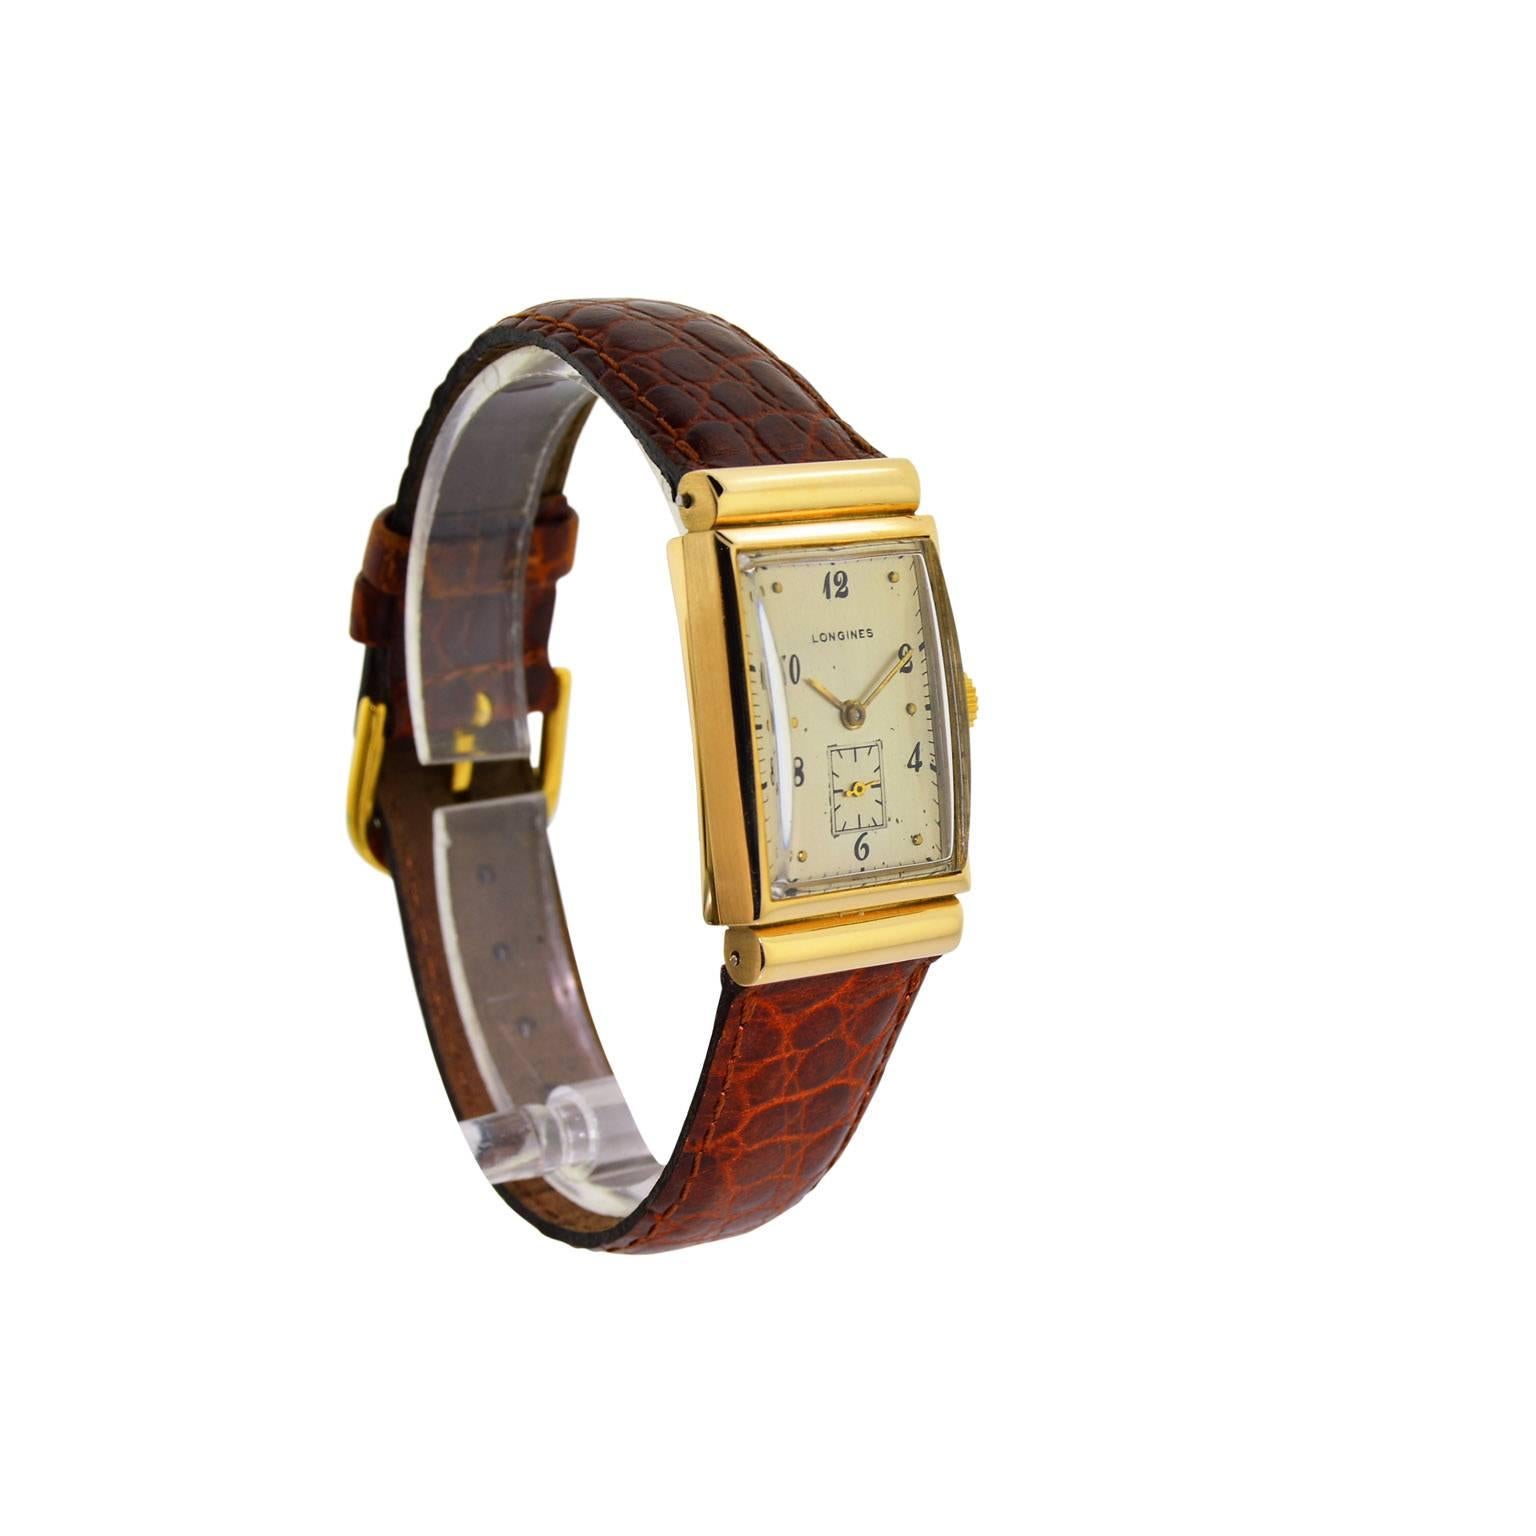 FACTORY / HOUSE:  Longines Watch Company
STYLE / REFERENCE: Art Deco / Tank Style
METAL / MATERIAL:  14 Kt Solid Yellow Gold
DIMENSIONS: 36mm X  20mm
CIRCA: 1940's
MOVEMENT / CALIBER: Manual Winding /  17 Jewels / Cal. 96
DIAL / HANDS: Silvered Dial